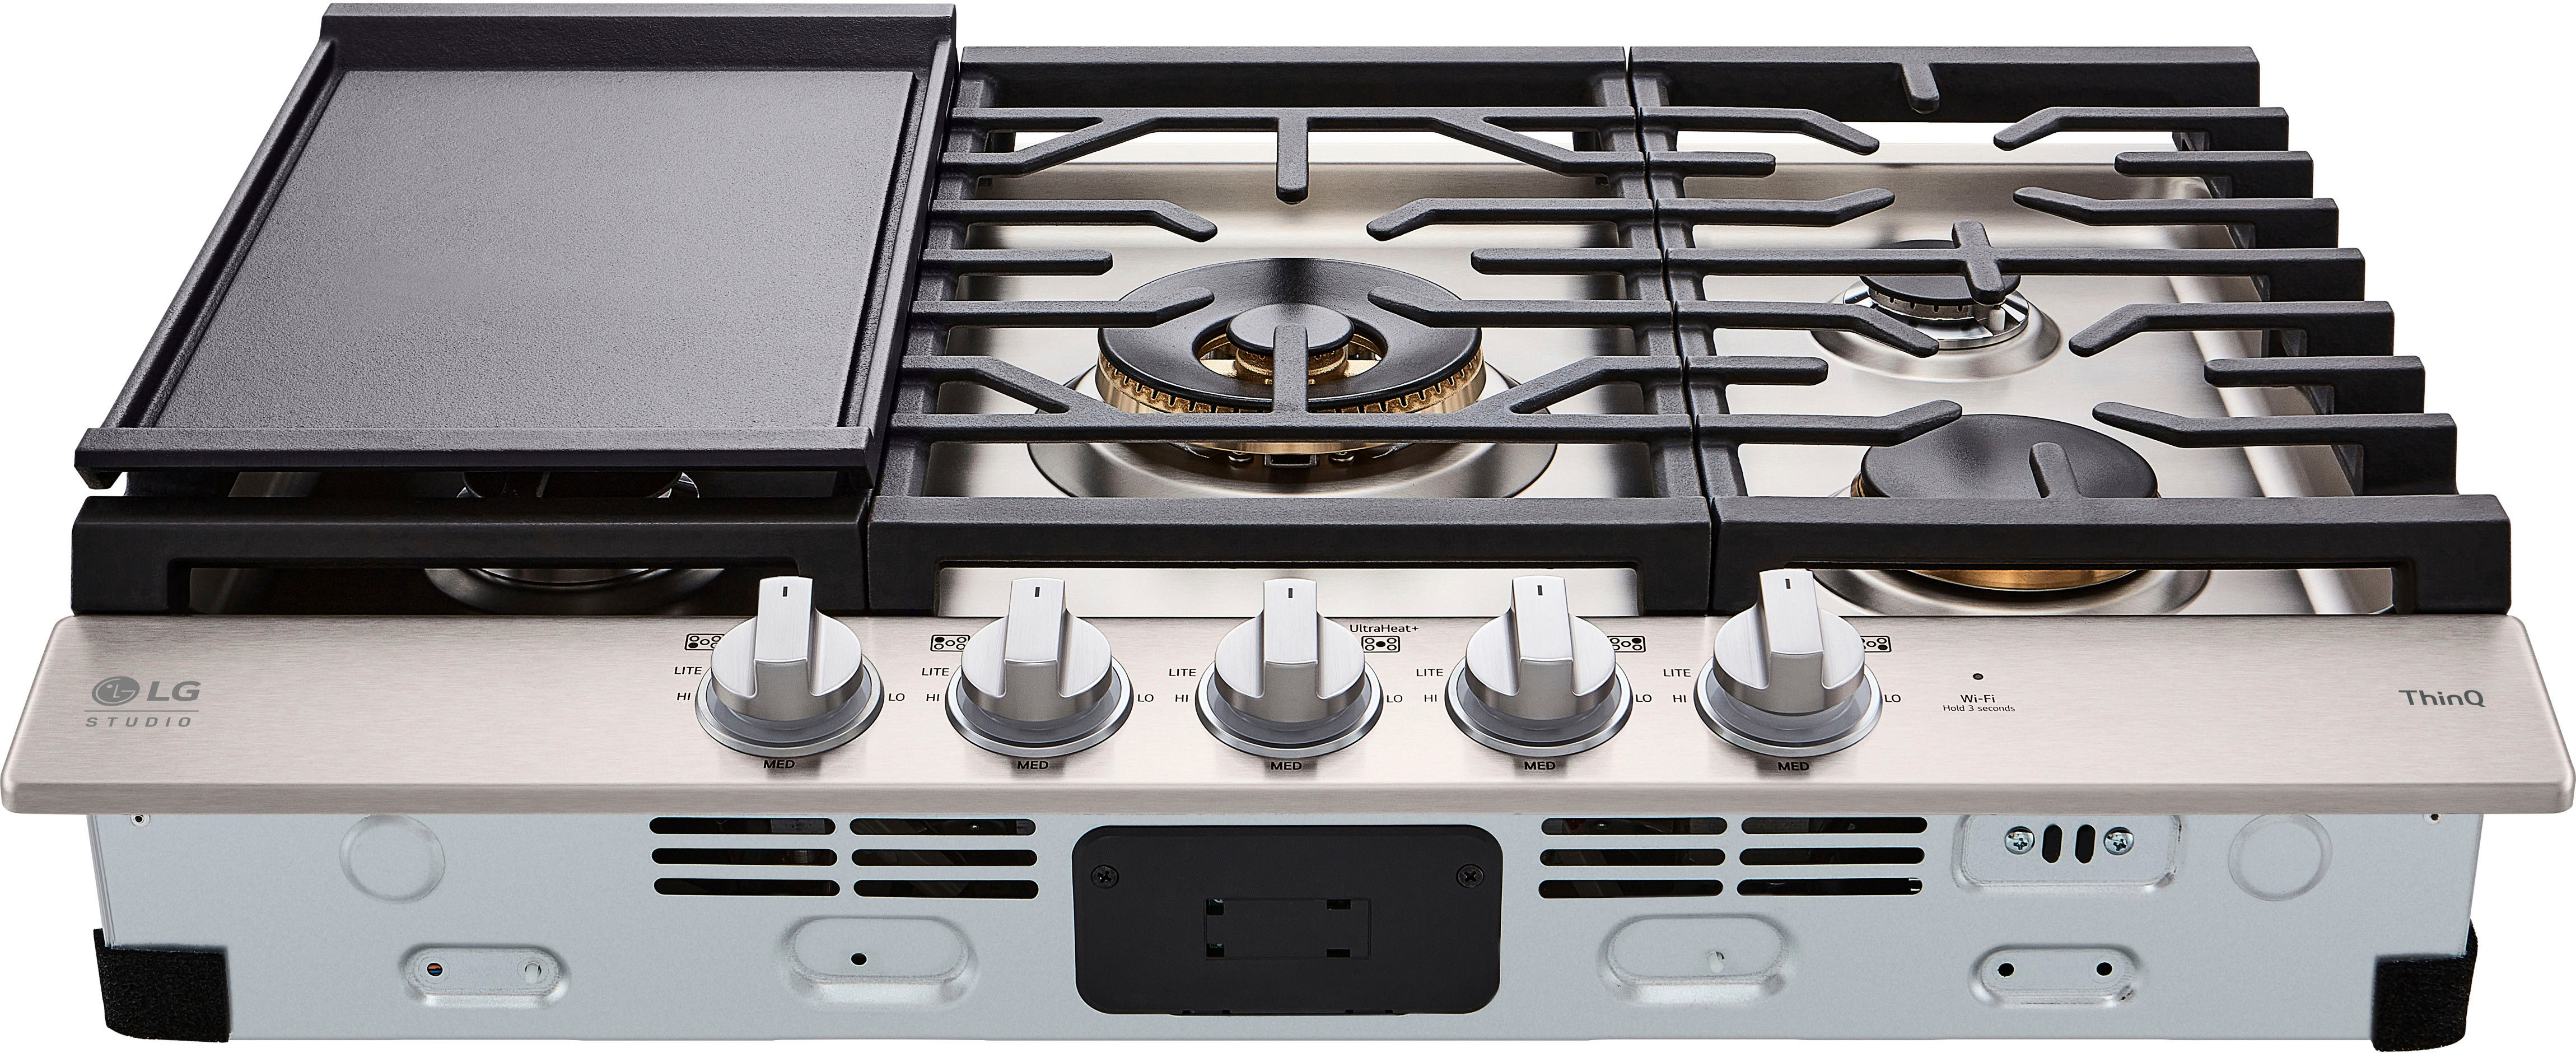 LG STUDIO 30 Built-In Gas Cooktop with 5 Burners and UltraHeat Stainless  Steel LSCG307ST - Best Buy